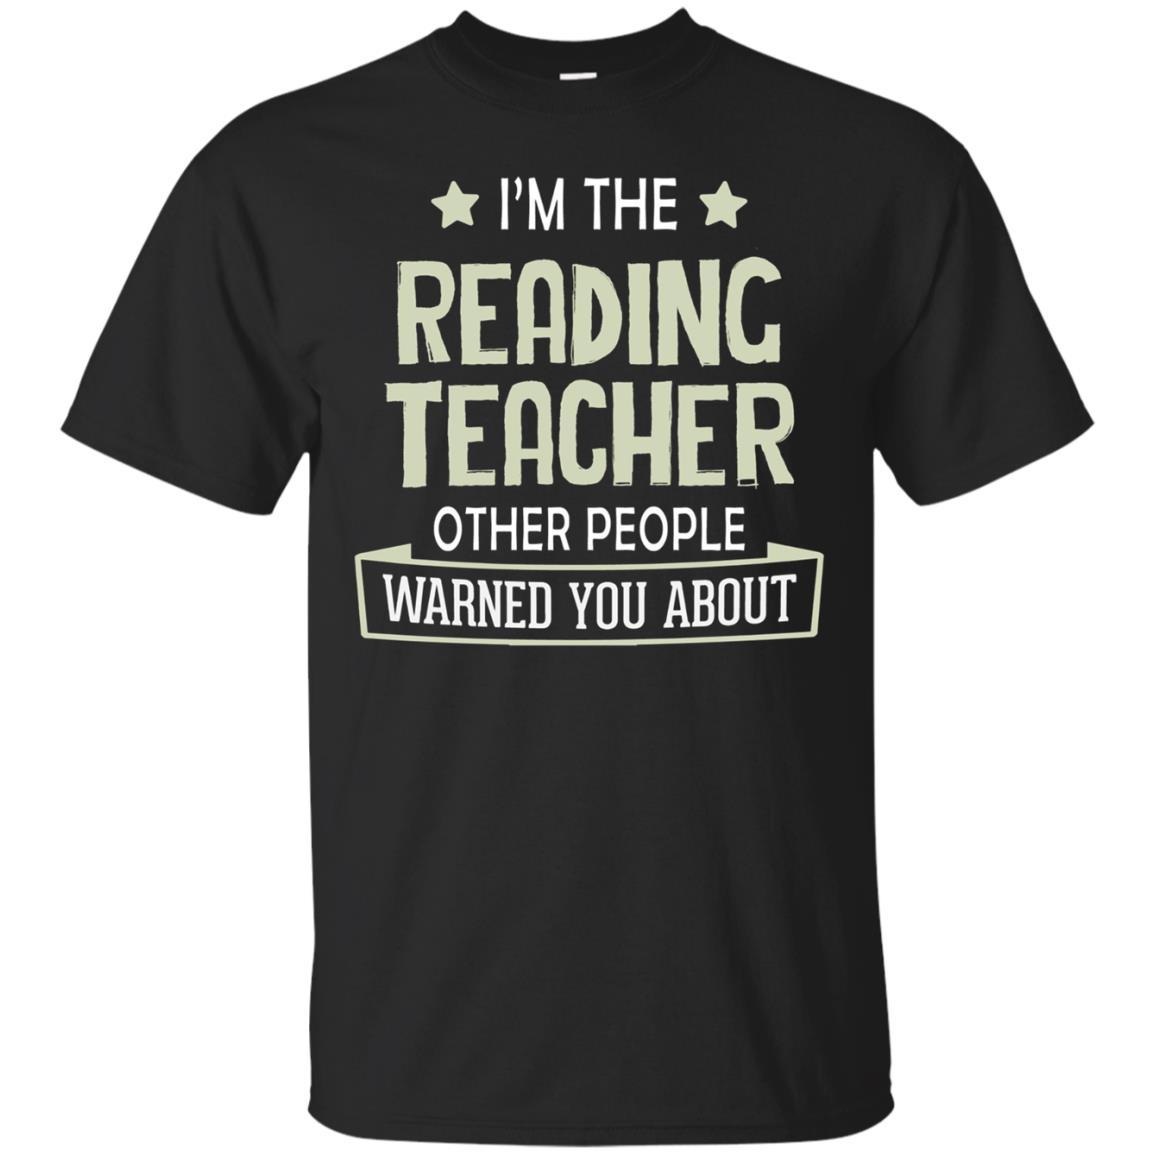 Reading Tea T-shirt - Warned You About!